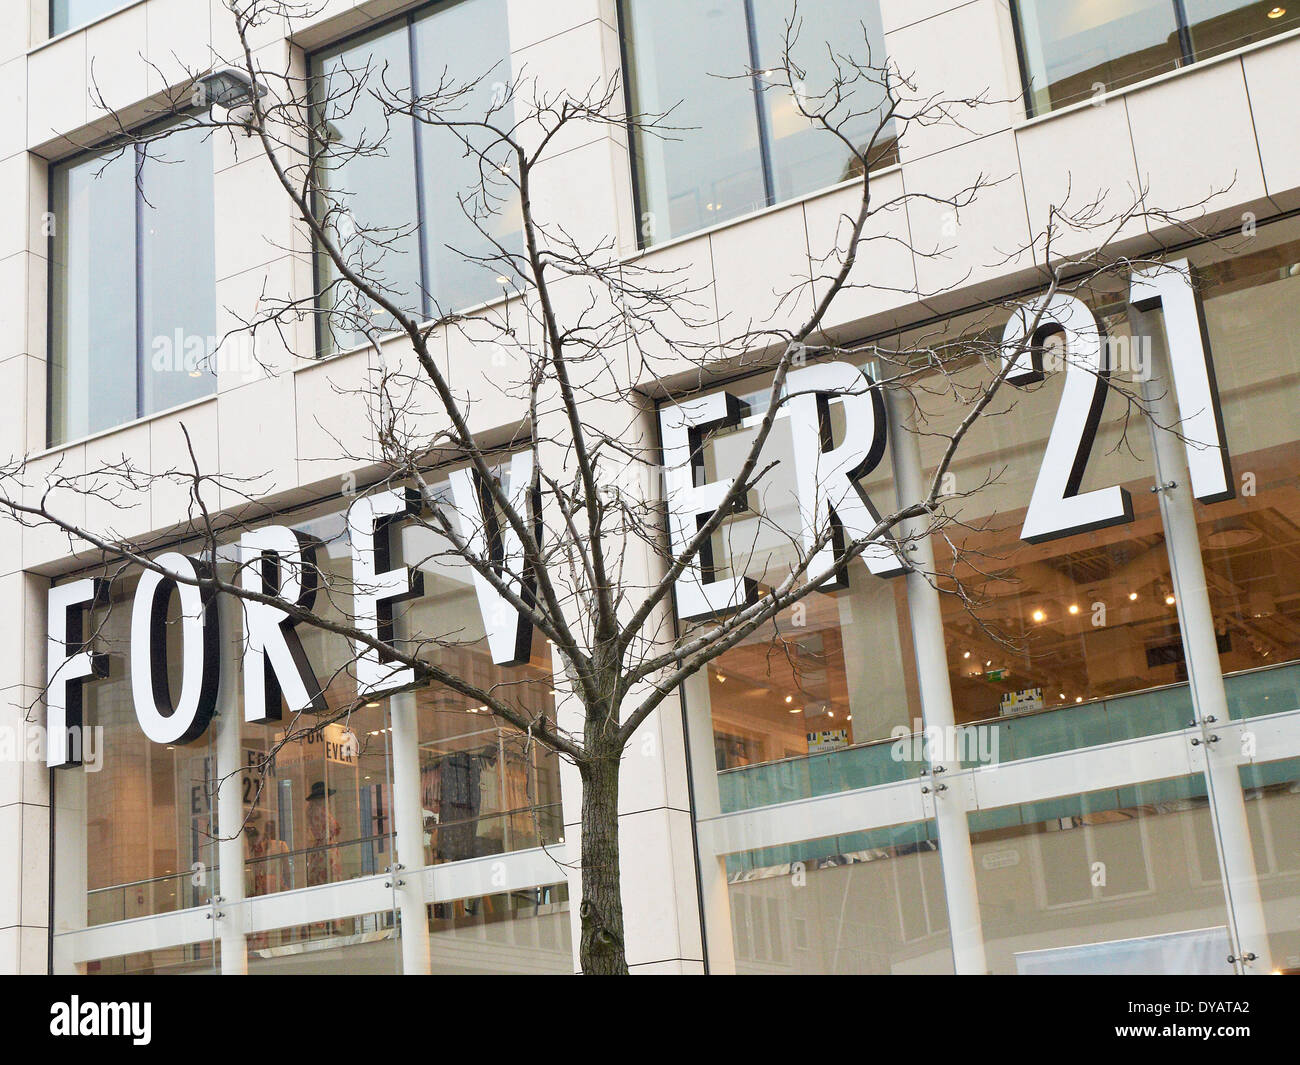 Forever 21 shop sign in Liverpool UK Stock Photo